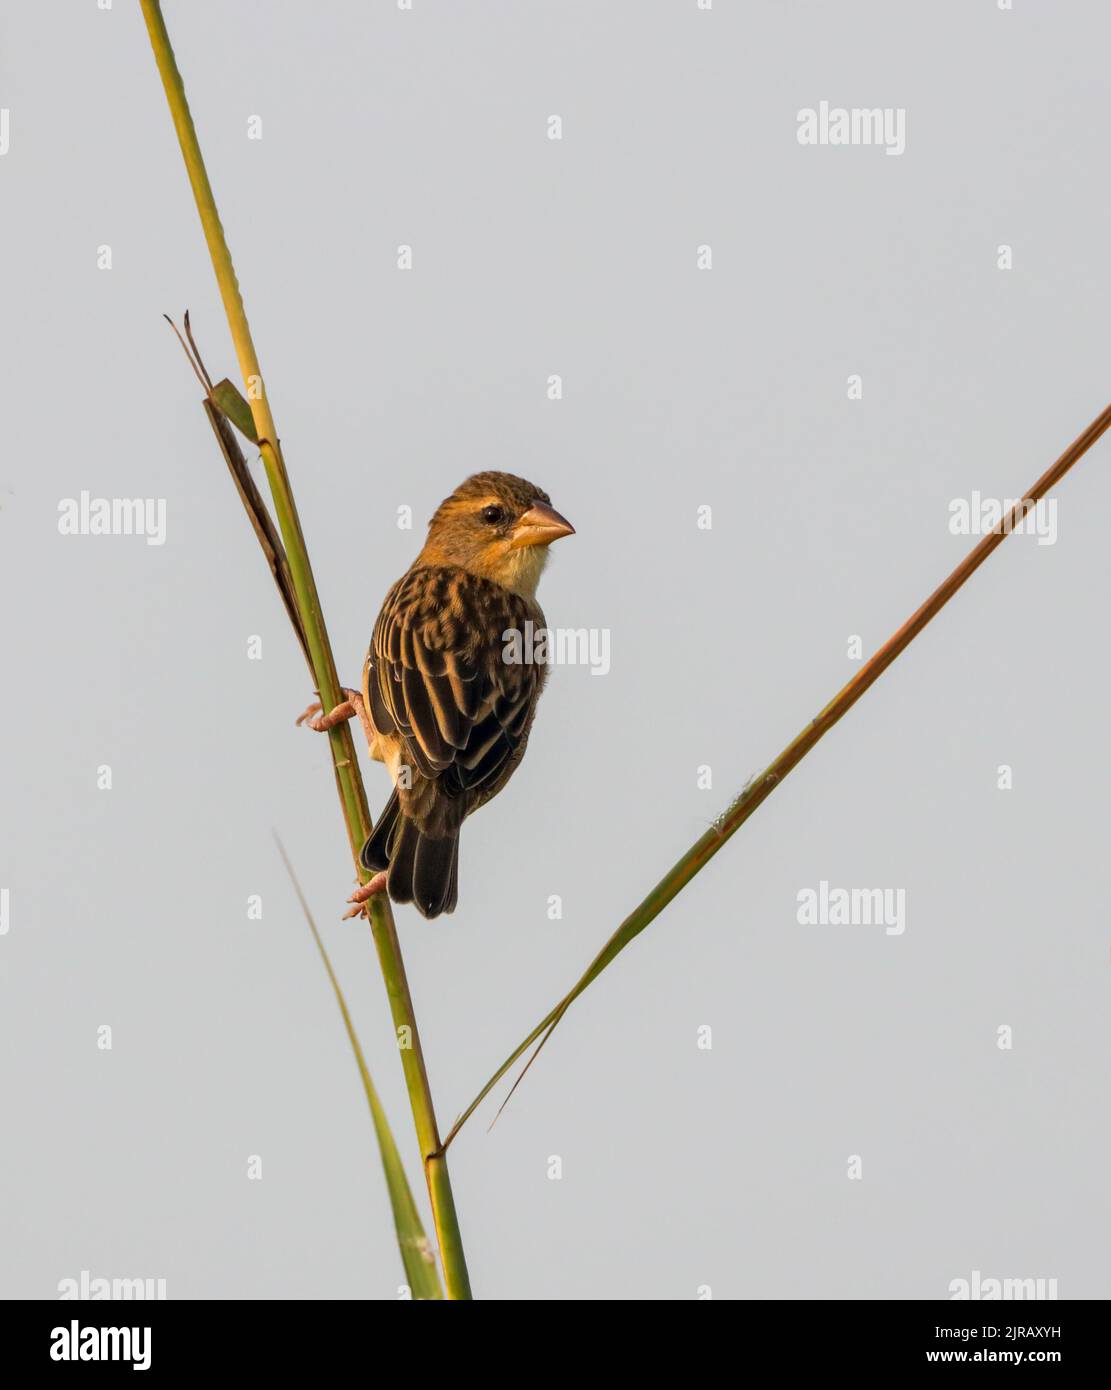 Baya weaver is a weaverbird found across the Indian Subcontinent and Southeast Asia. Stock Photo